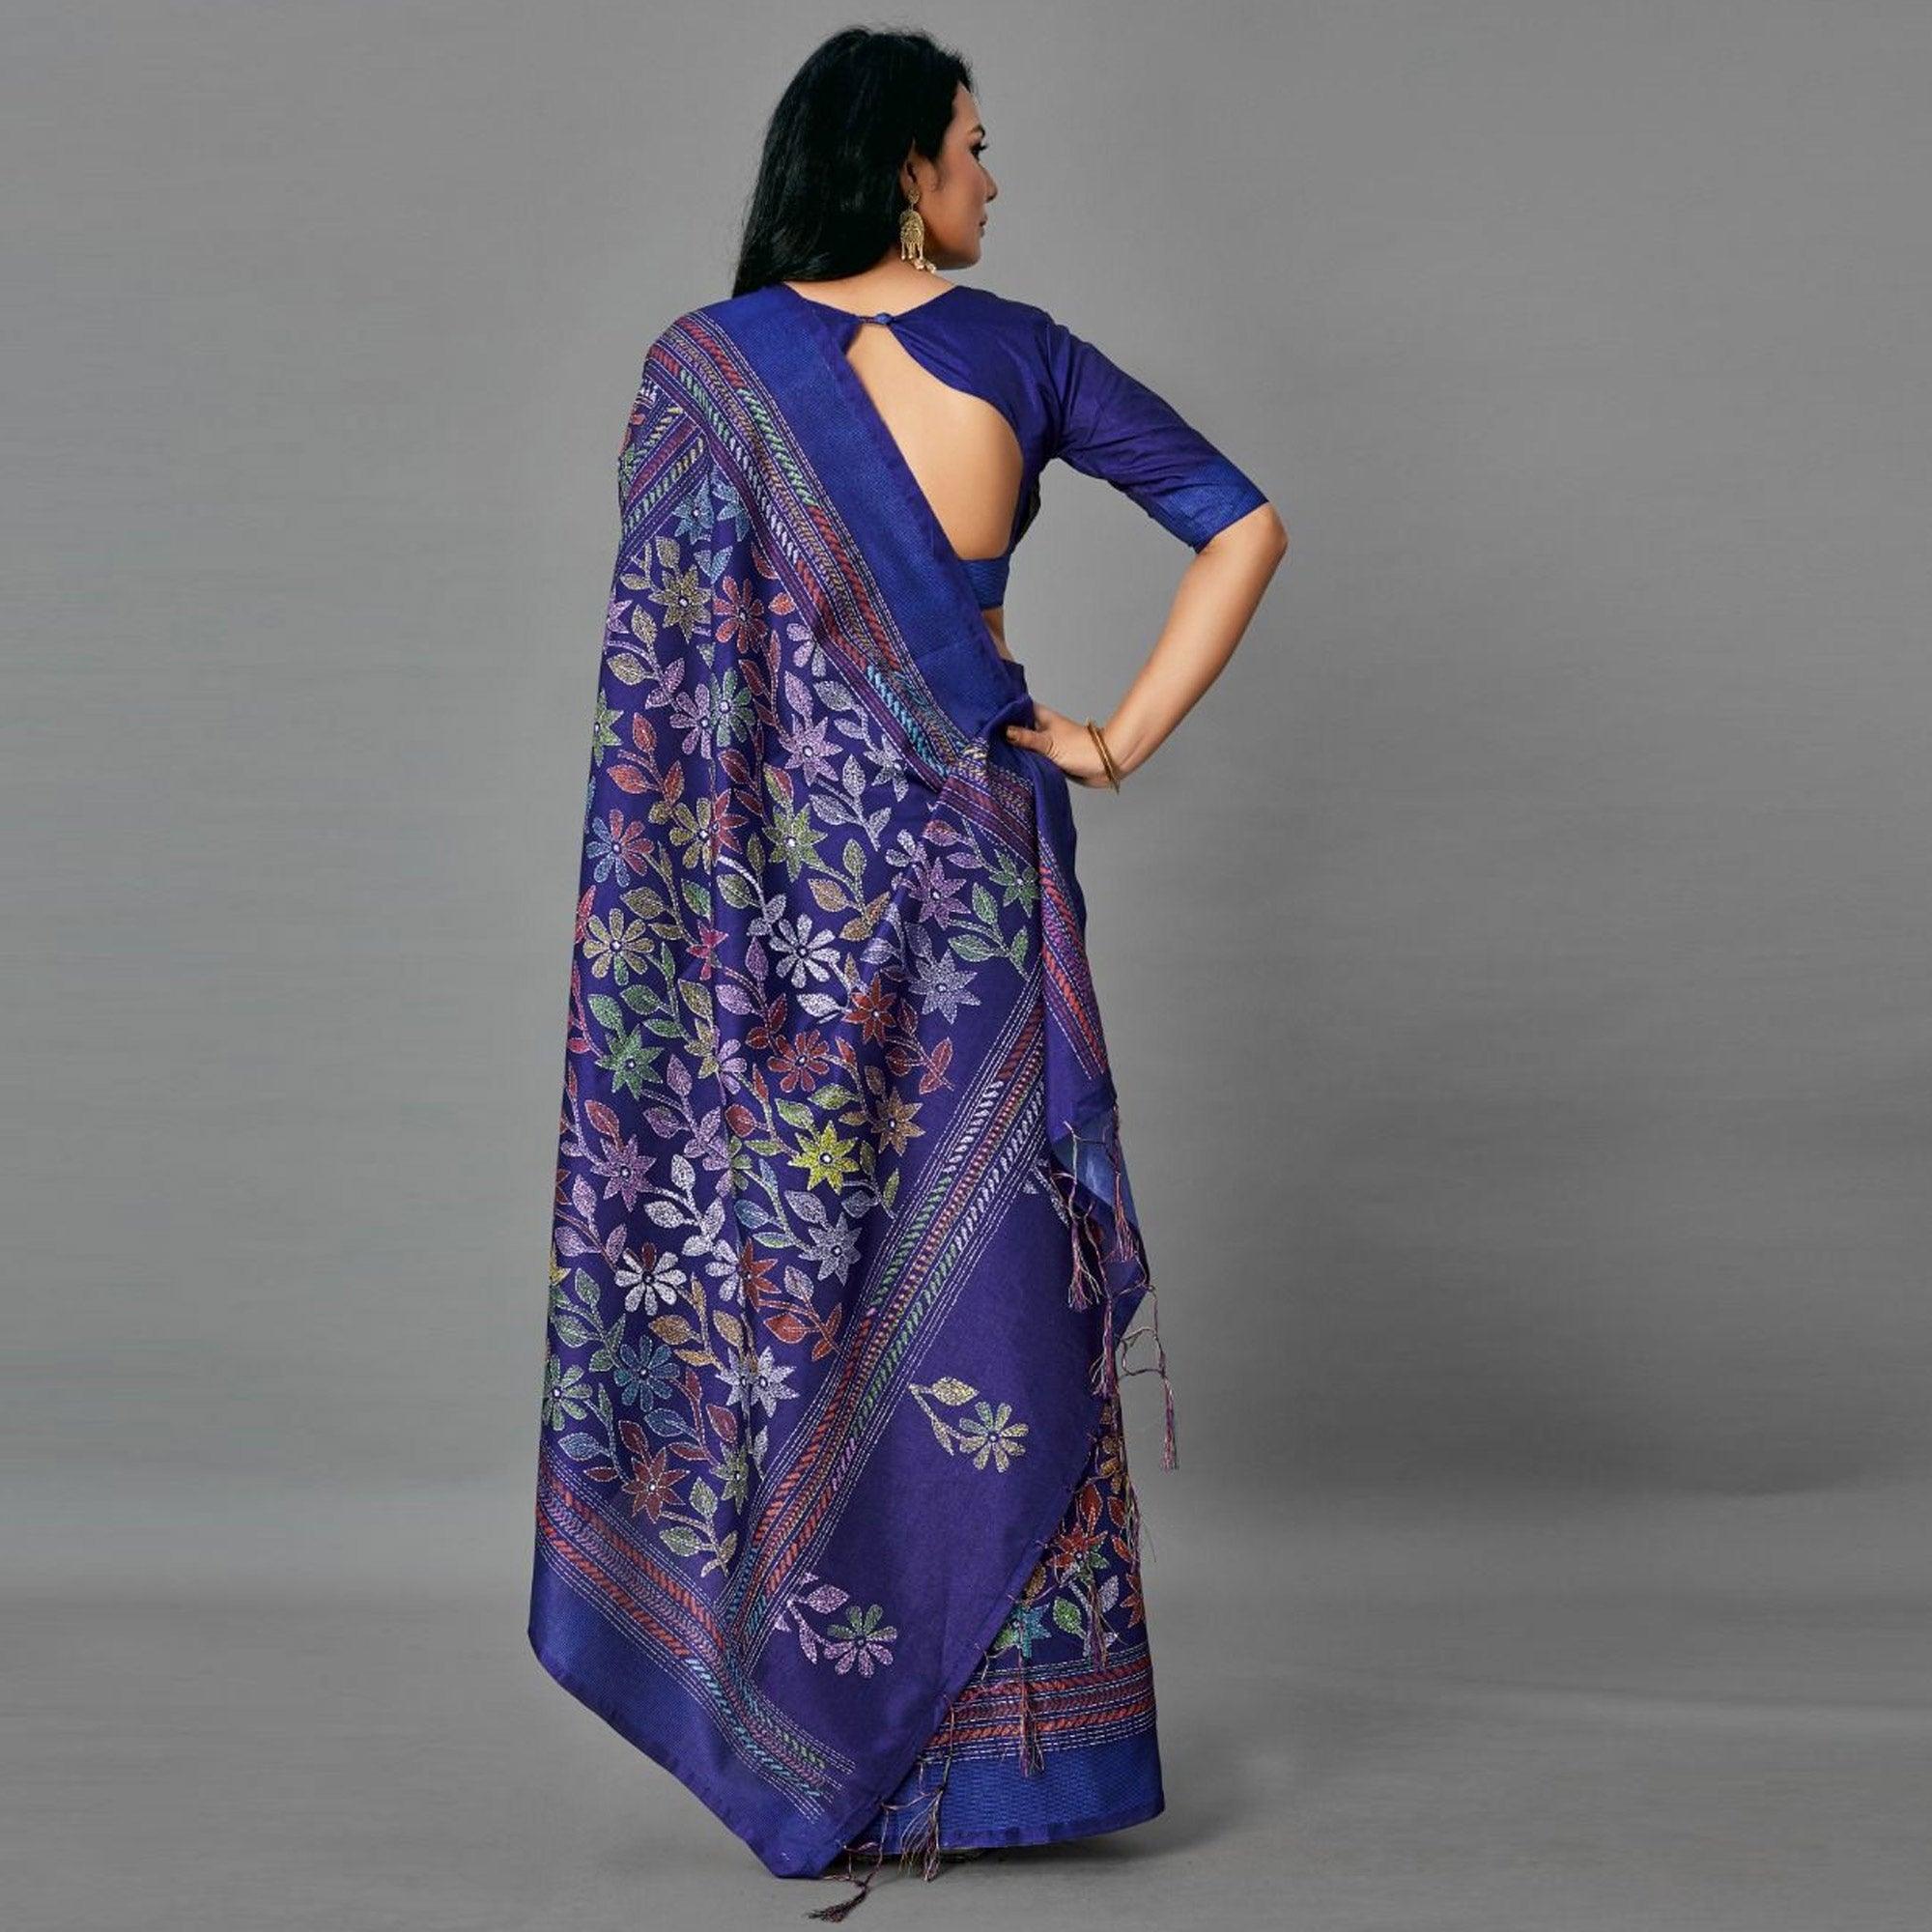 Blue Casual Art Silk Printed Saree With Unstitched Blouse - Peachmode